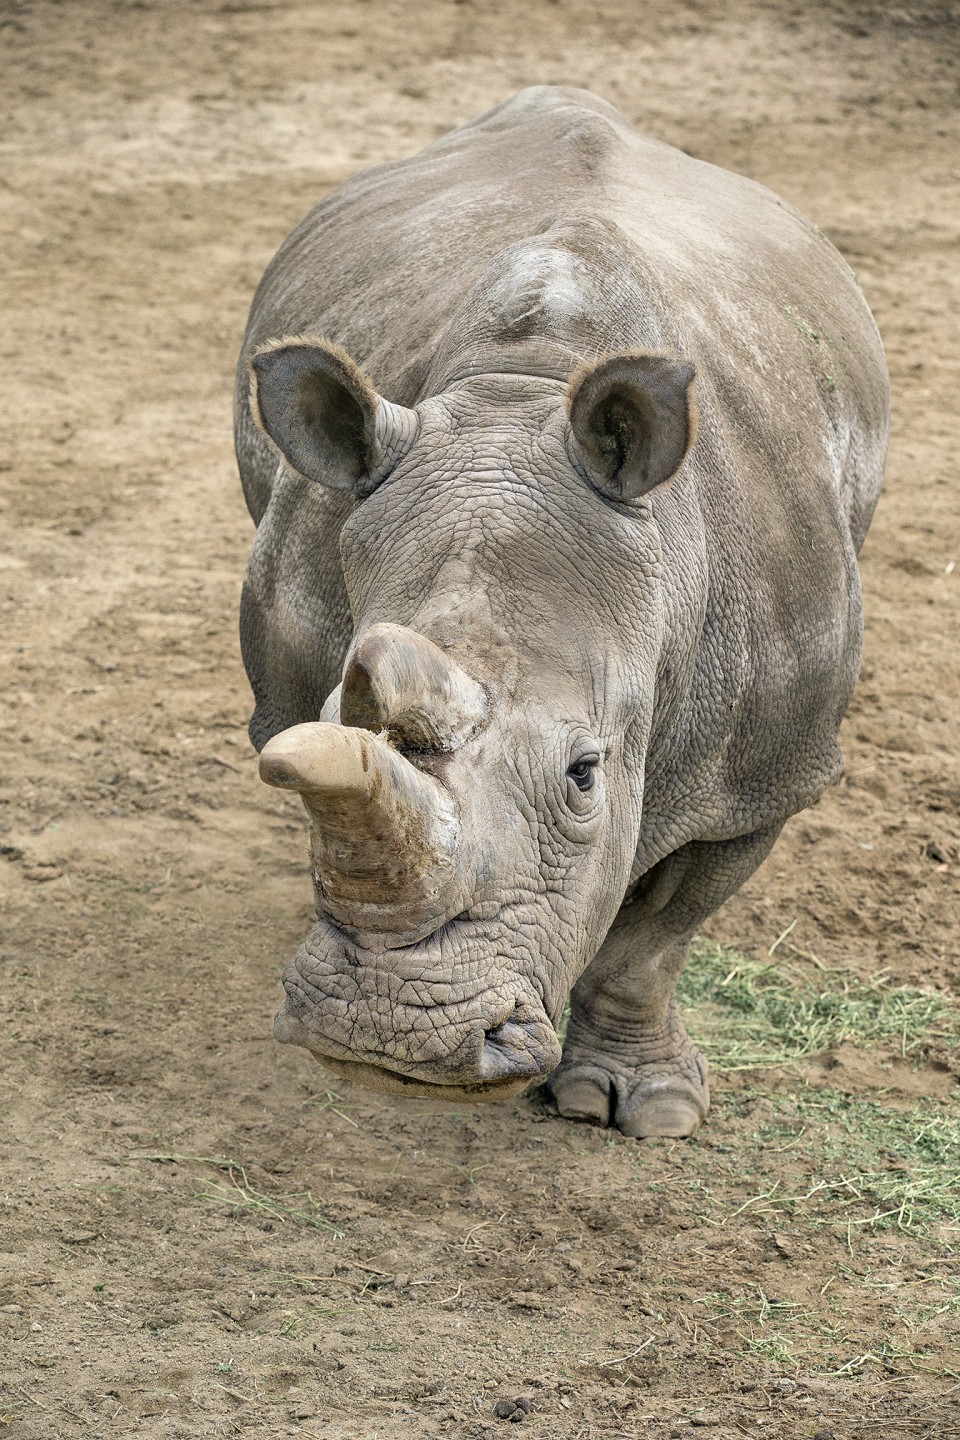 The Safari Park's beloved Nola, one of only four northern white rhinos remaining on the planet, was the inspirational icon for San Diego Zoo Global's Rally 4 Rhinos in May 2015 on Endangered Species Day, to call attention to the dire plight of rhinos in their native habitat. Rampant rhino poaching for their horns continues to decimate all rhino populations, and if nothing changes, all rhino species could be extinct by 2020. 